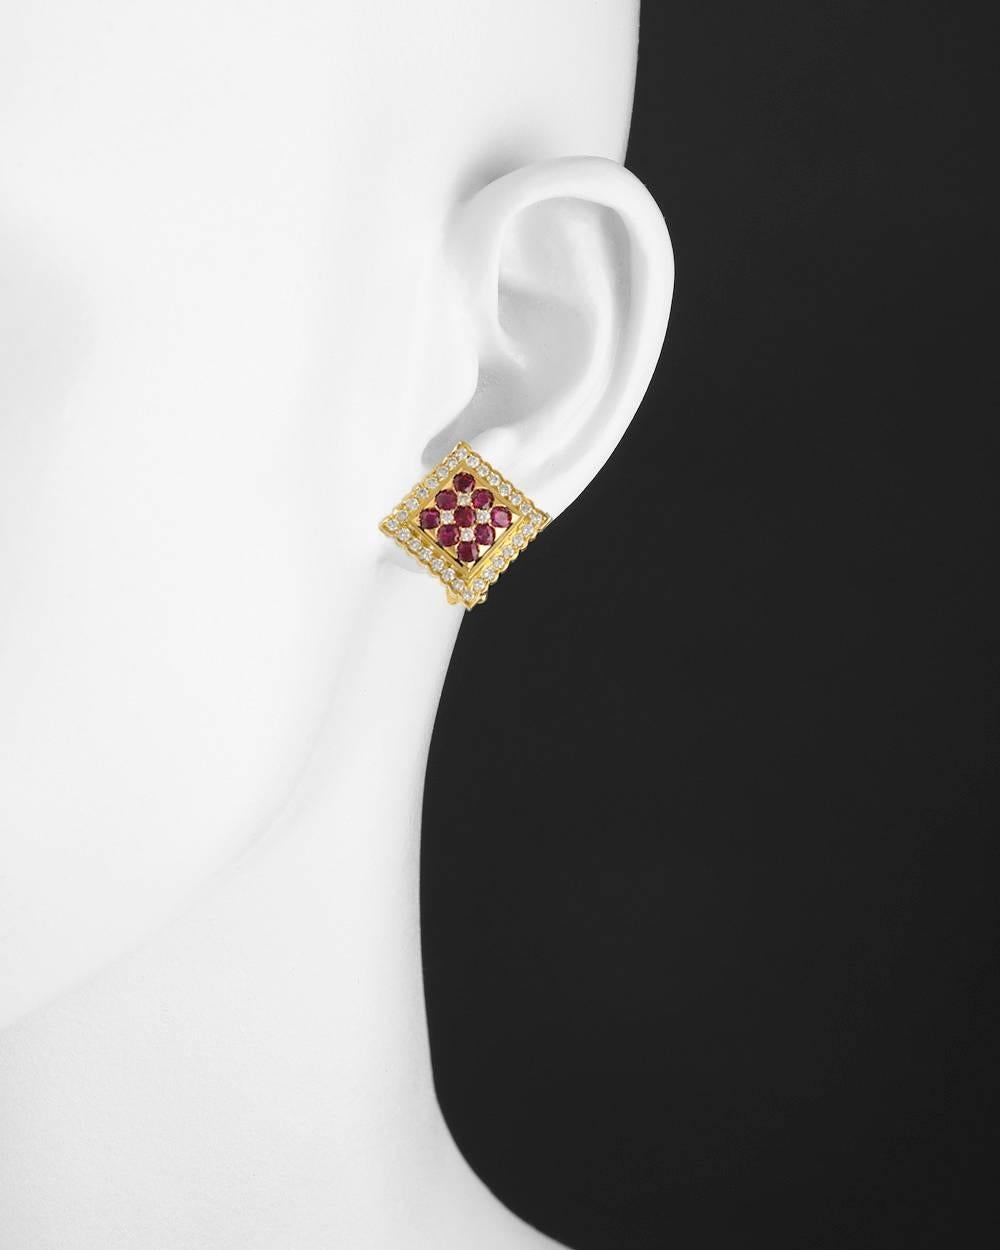 Square-shaped earclips, set with eighteen rubies weighing approximately 1.43 total carats and 56 diamonds weighing approximately 1.12 total carats, mounted in 18k yellow gold, with clip backs. 0.82